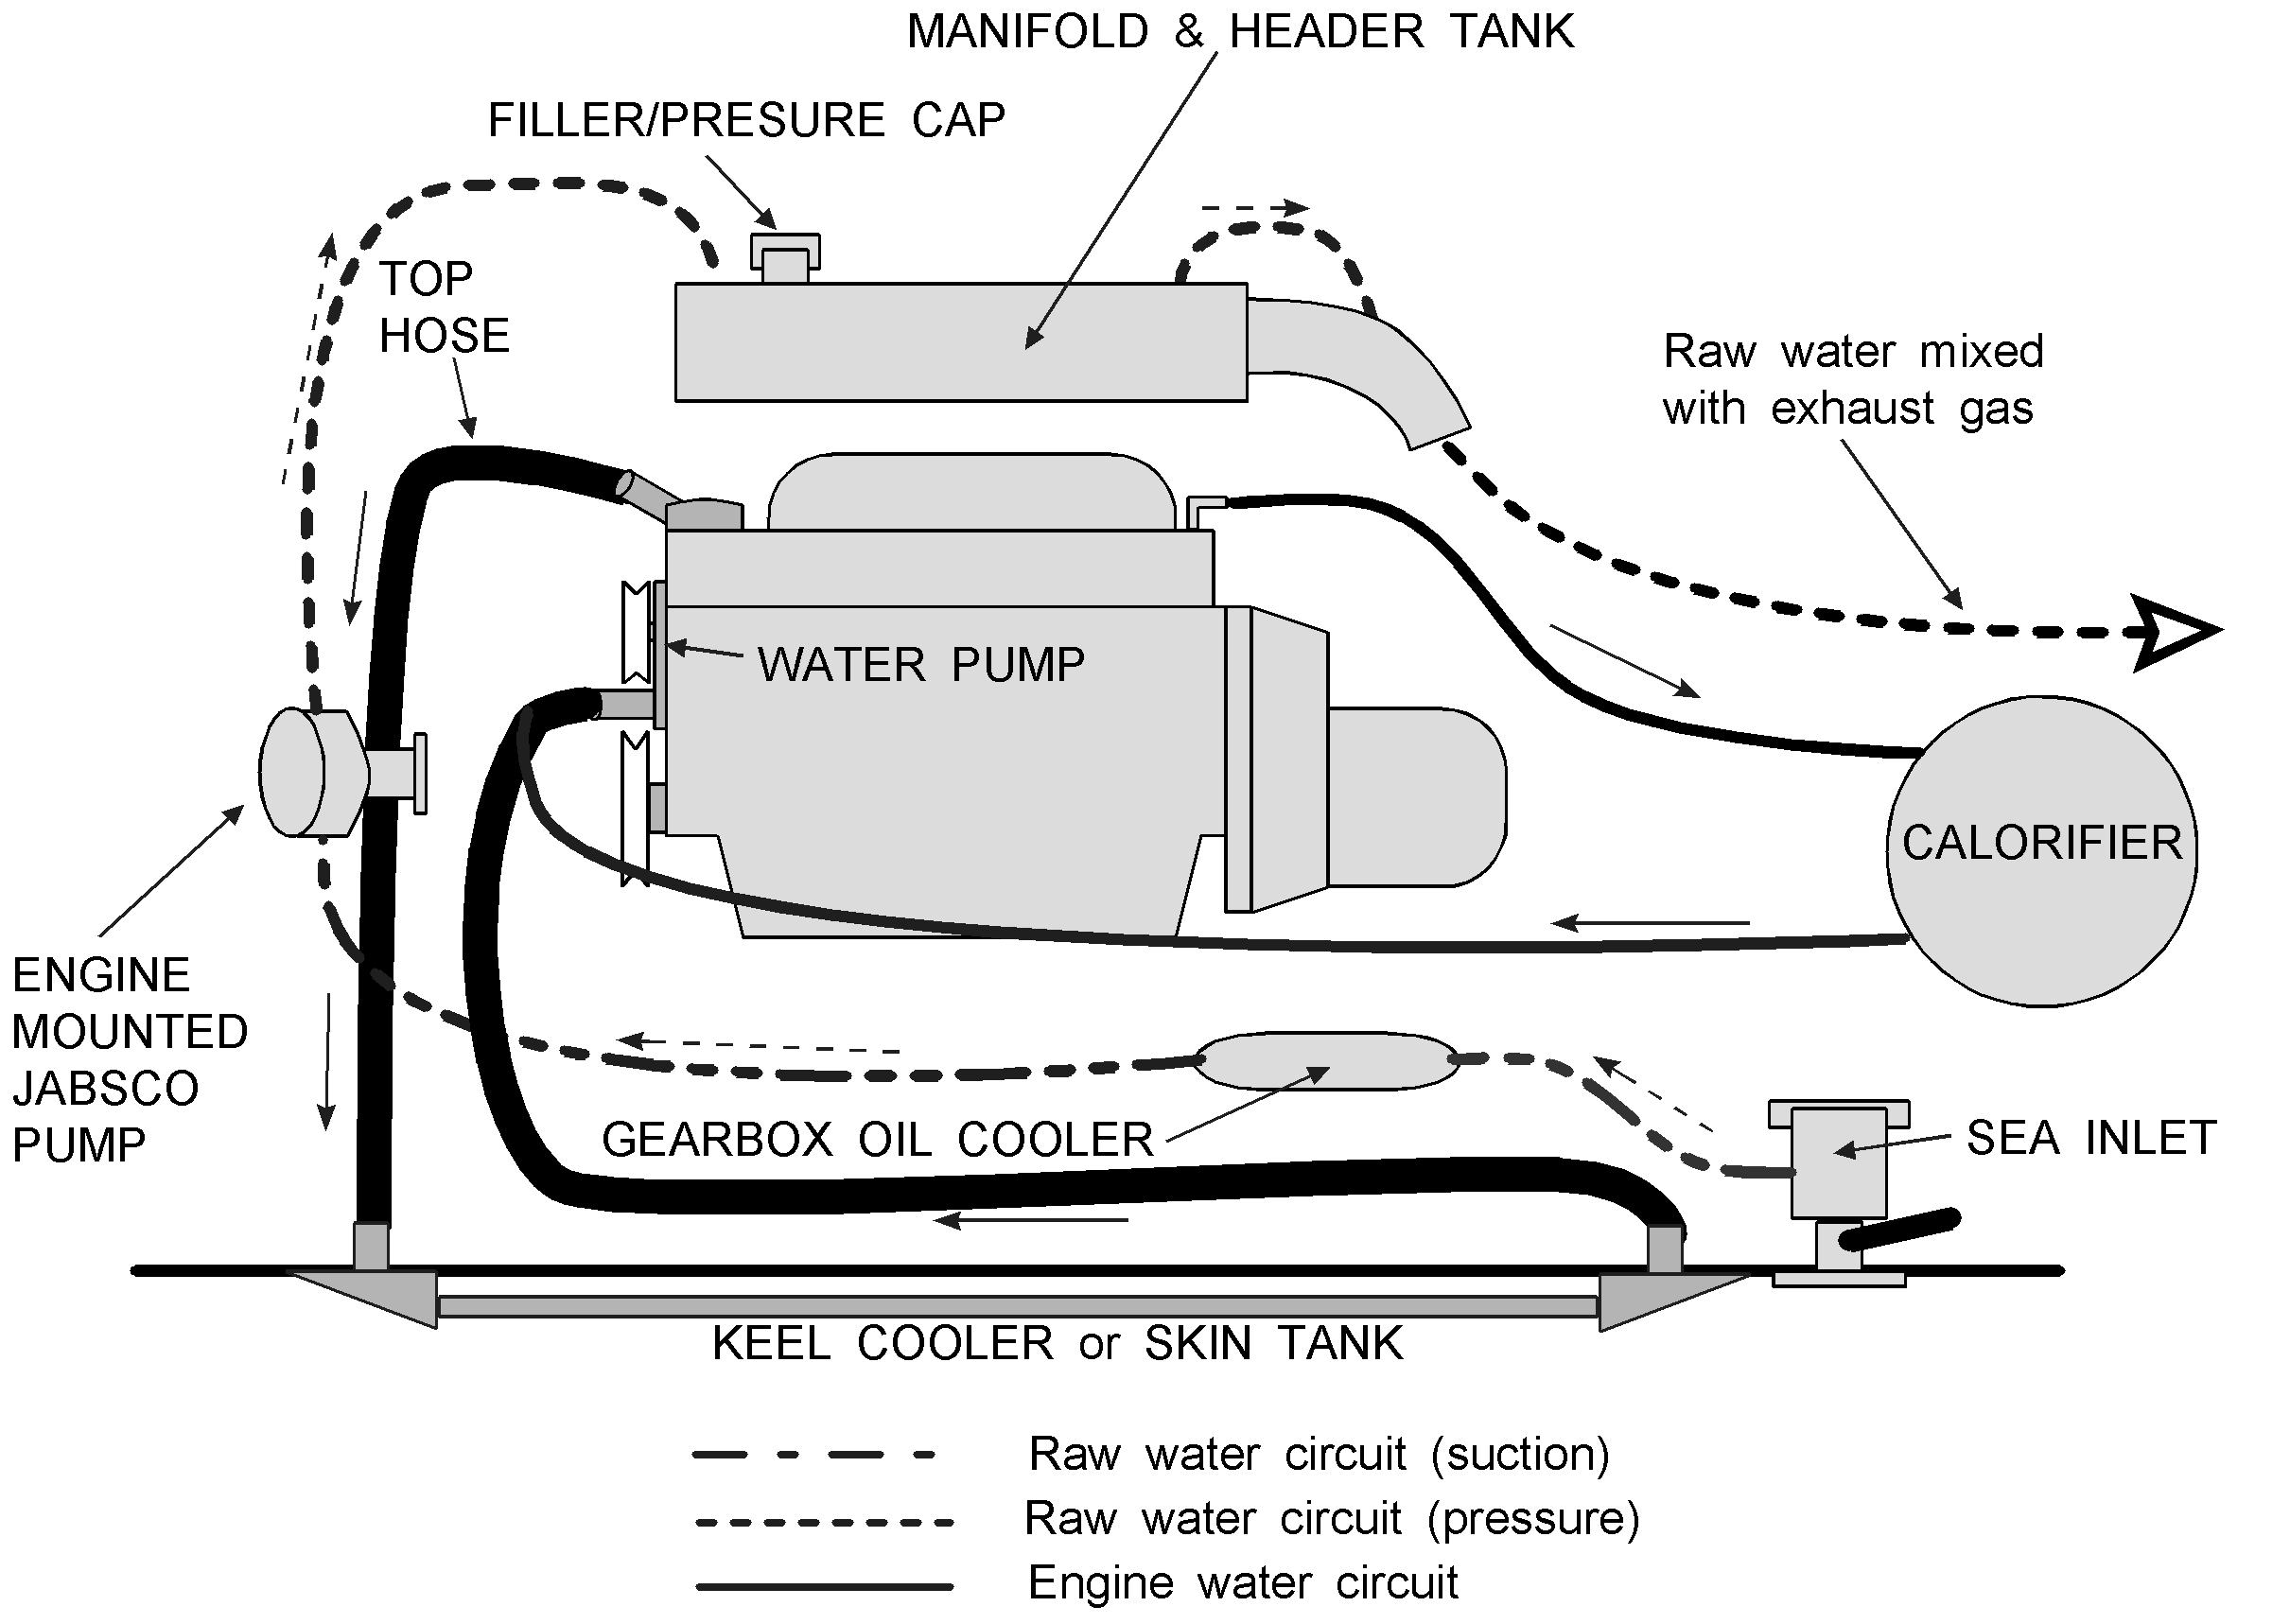 http://www.boatdesign.net/forums/electrical-systems/rewiring-classic 